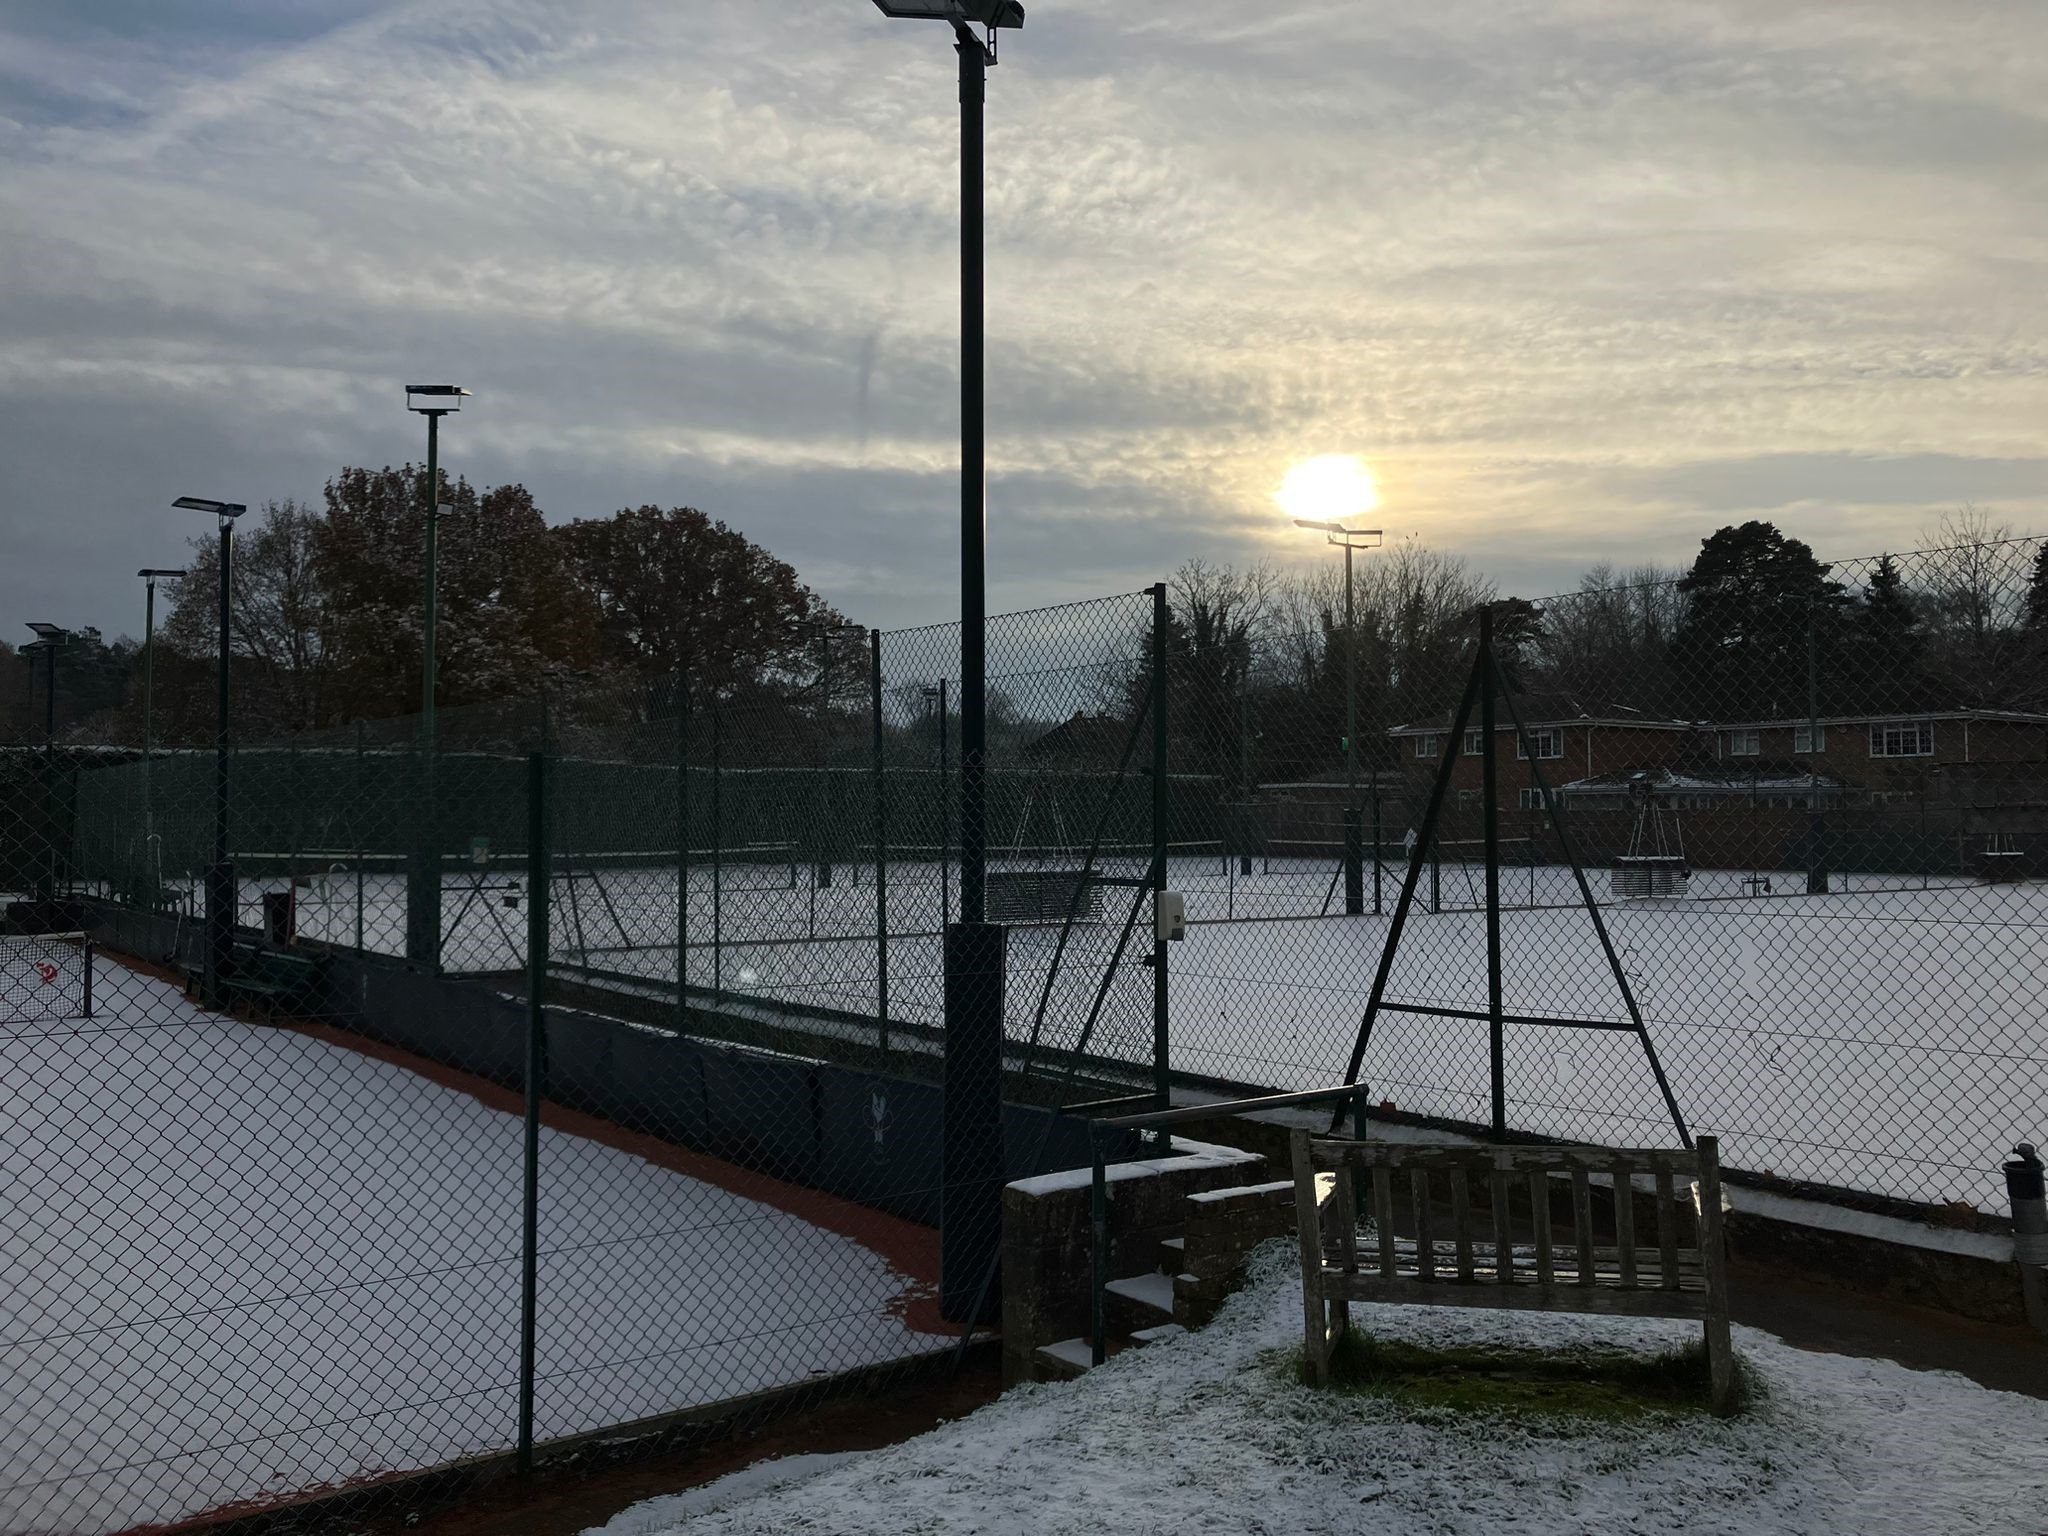 Snow on Courts